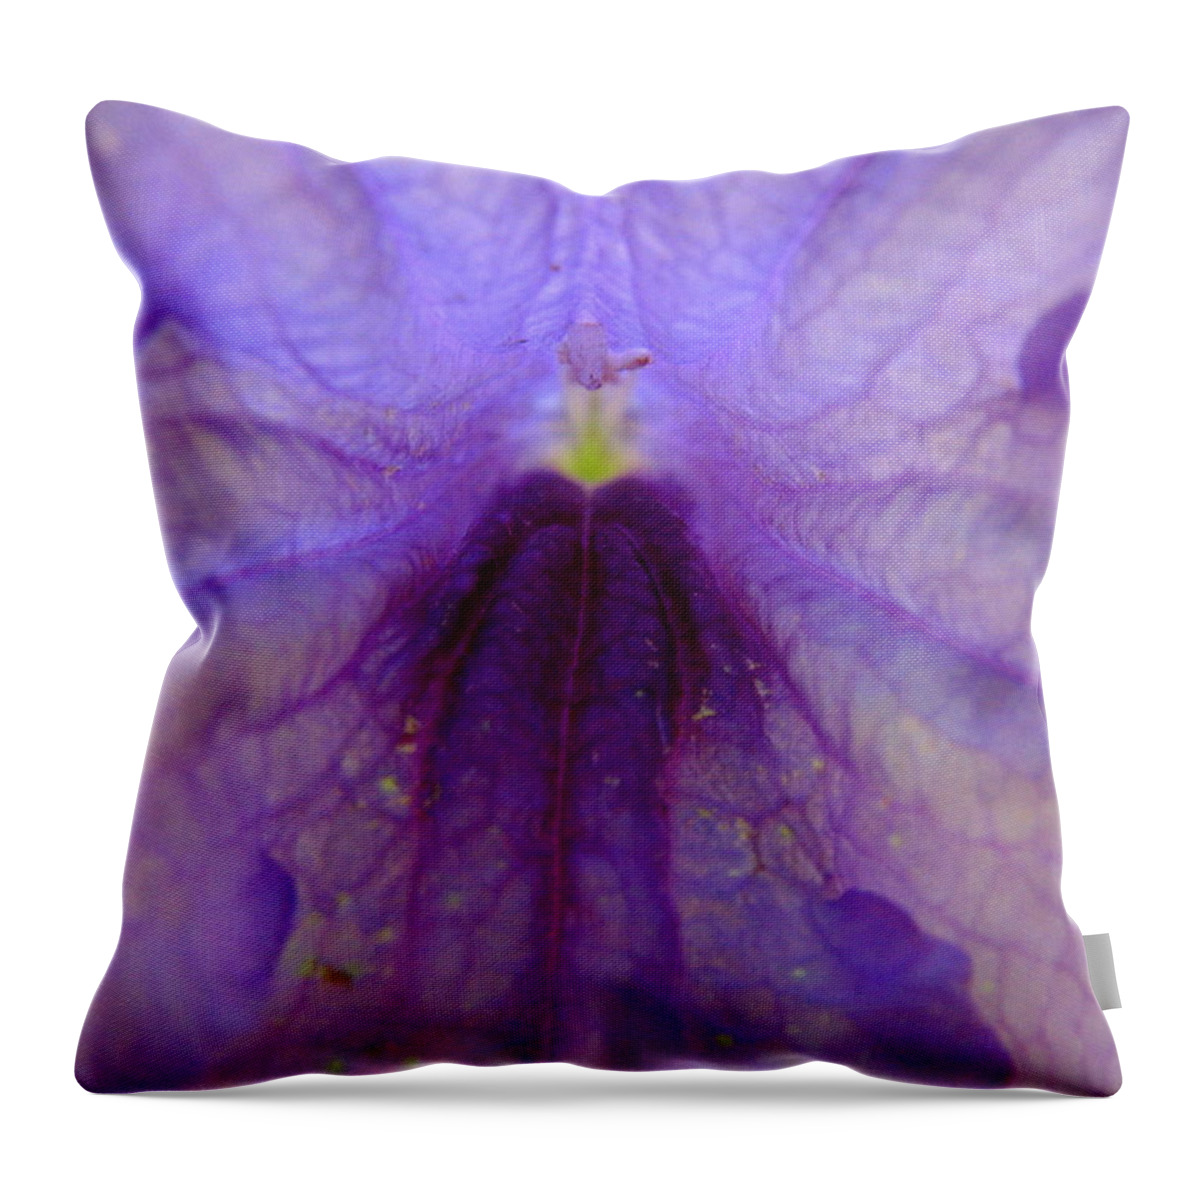 Mexican Petunia Throw Pillow featuring the photograph Mexican Petunia Macro by J M Farris Photography